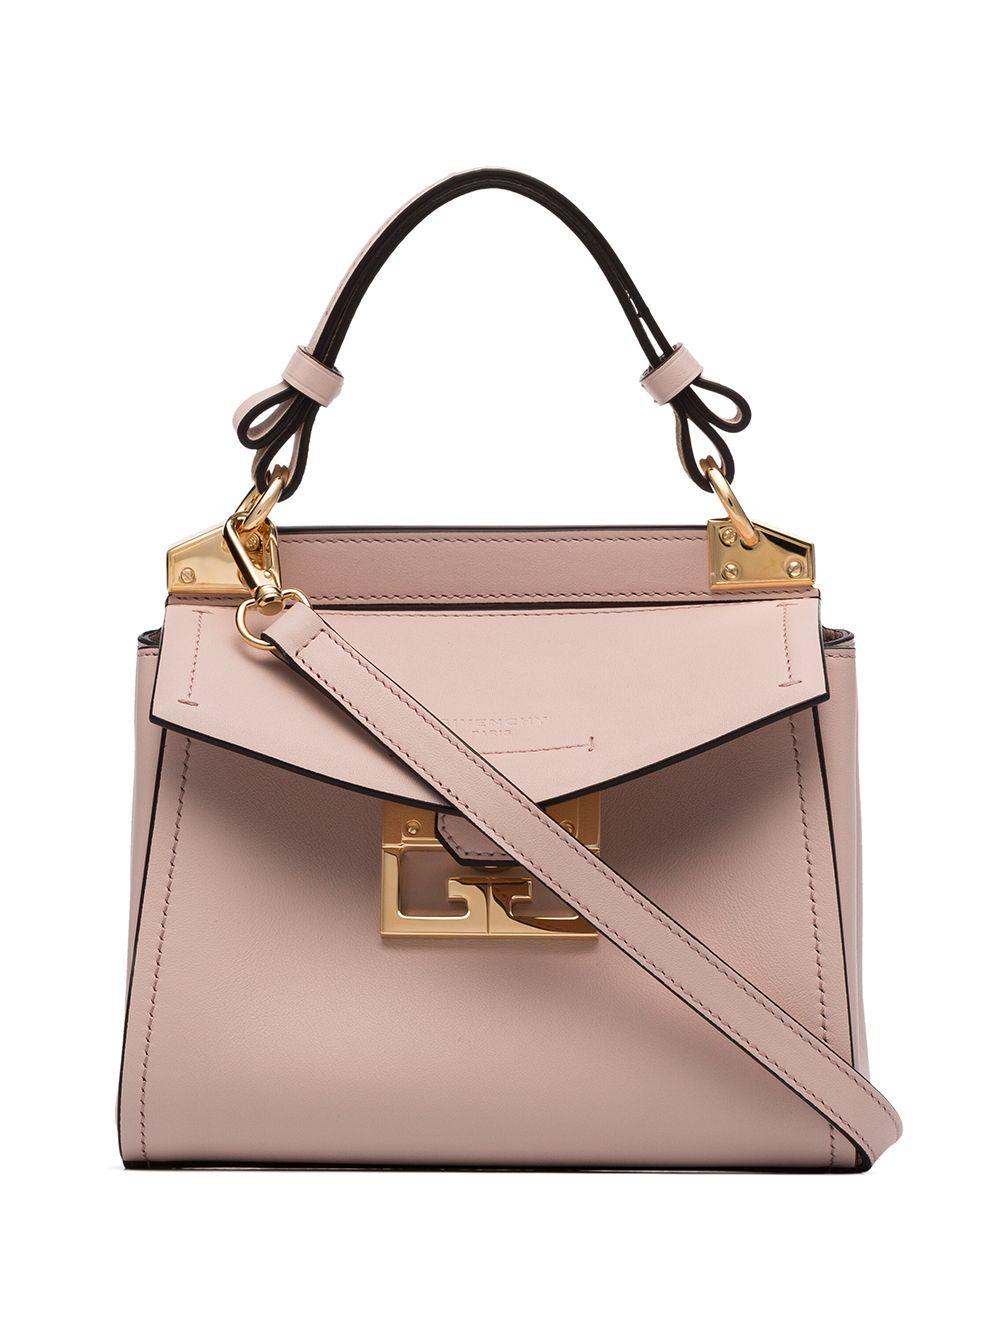 Givenchy Pink Mystic Mini Bag - Save 58% - Lyst